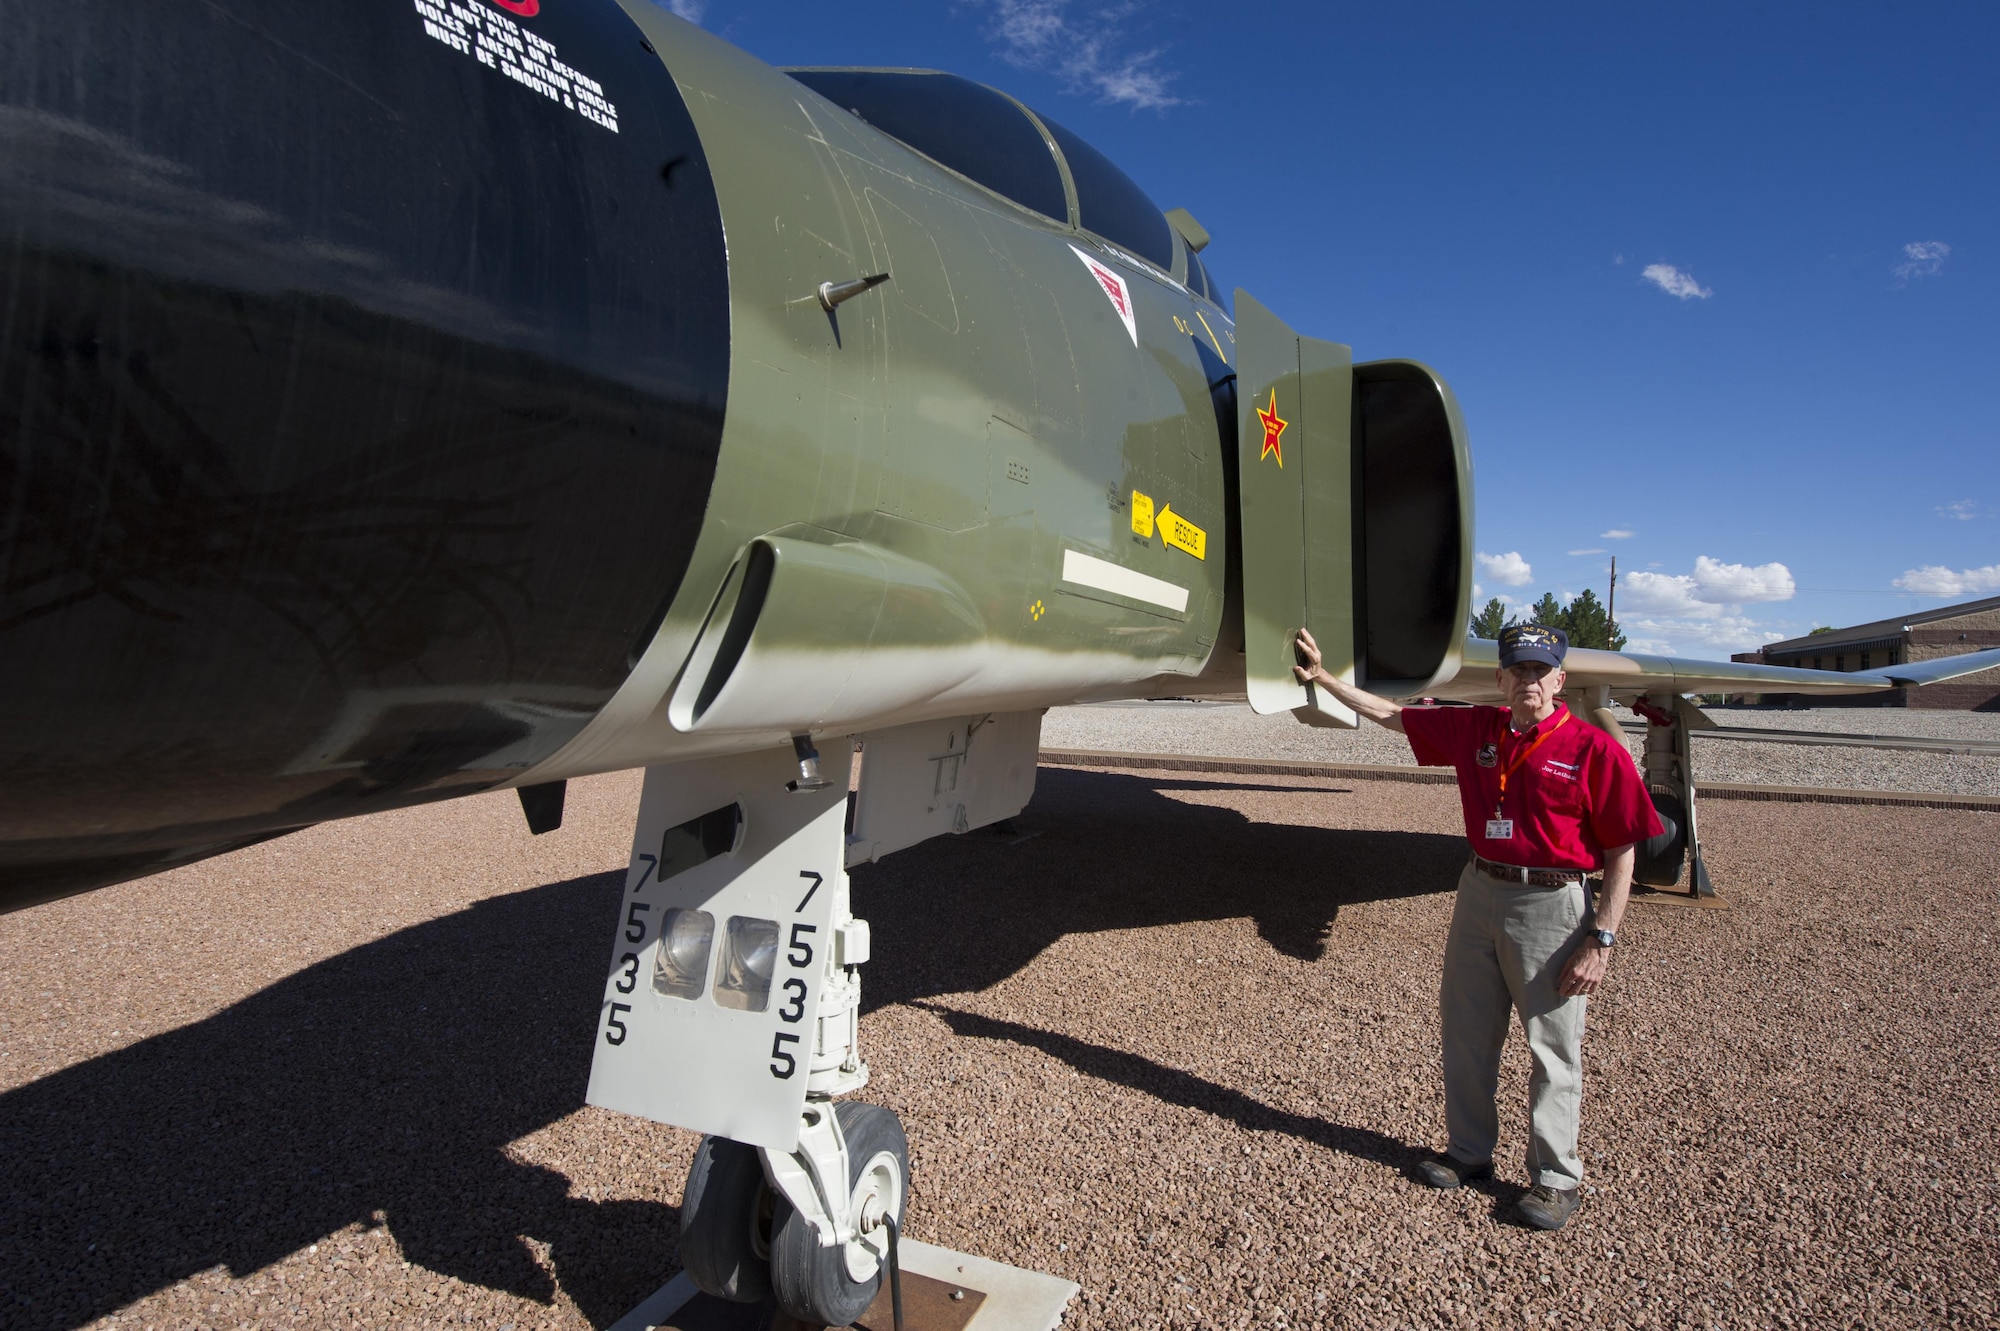 Col. (Ret.) Joe Latham, previously an F-4 Phantom pilot from Holloman Air Force Base, N.M., poses for a picture Sept. 13, 2016, at Heritage Park, Holloman AFB, next to an F-4 adorned with his name. Latham shot down a MiG-21 35 miles north of Hanoi, Vietnam on Nov. 5, 1966. Latham’s visit was part of Holloman’s annual Phantom Society Tour where 160 aircraft enthusiasts, including veterans and non-veterans with aviation backgrounds, visit various base locations. The tour included an F-16 Fighting Falcon briefing and static display, travel to Holloman’s High Speed Test Track, the opportunity to view QF-4s and F-16s in flight, and a visit to Heritage Park to view displays of various aircraft historically stationed at Holloman AFB. (U.S. Air Force photo by Master Sgt. Matthew McGovern)